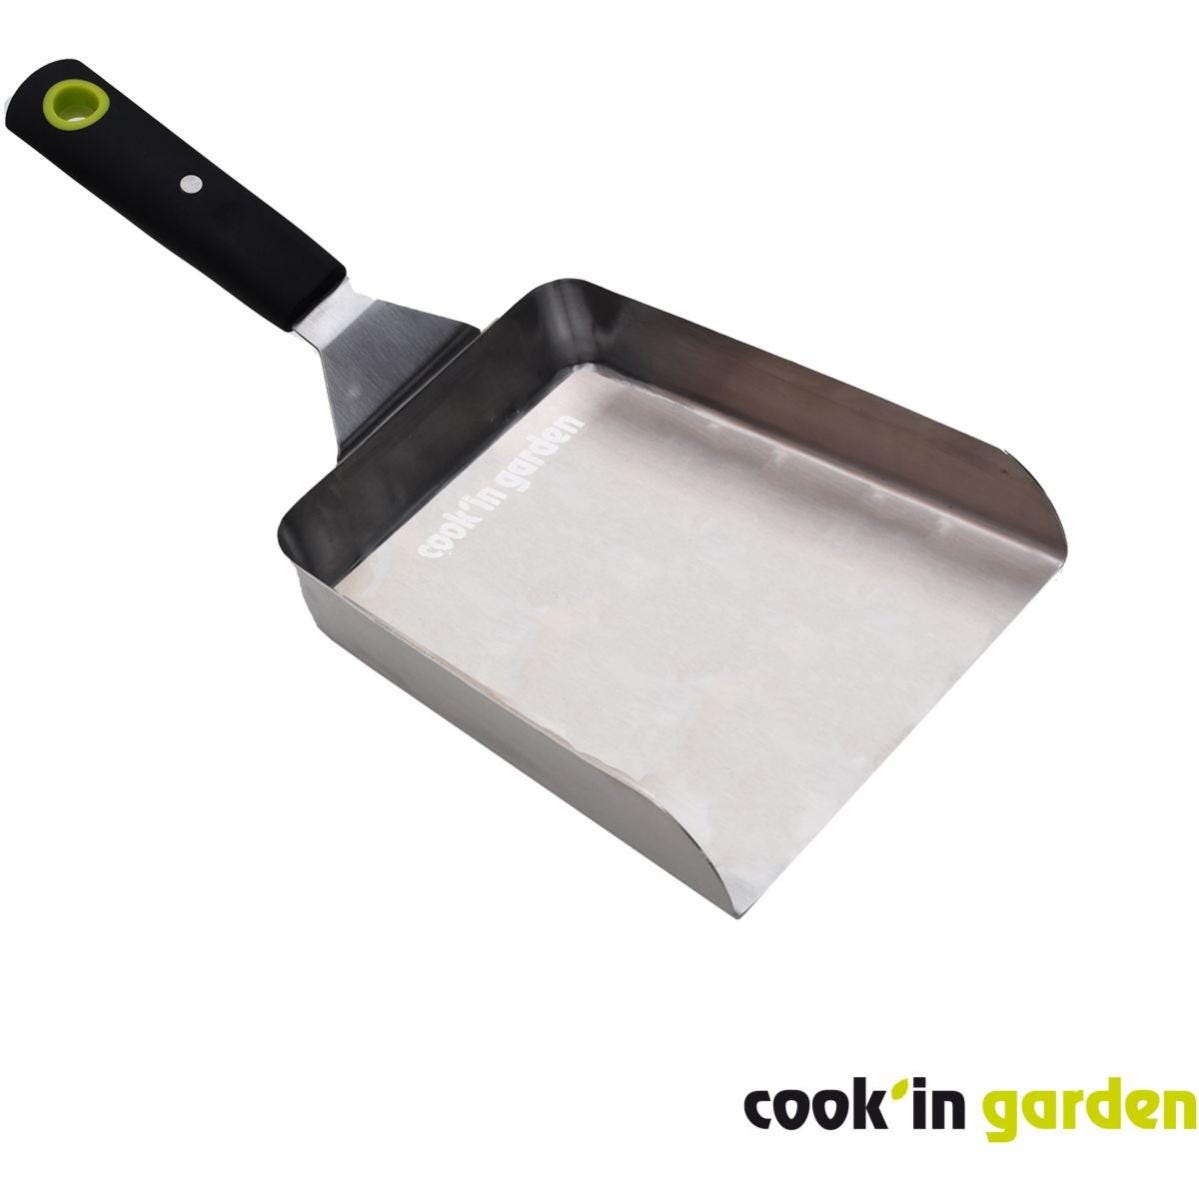 Ustensile plancha COOK'IN GARDEN a plancha equilibree a bords